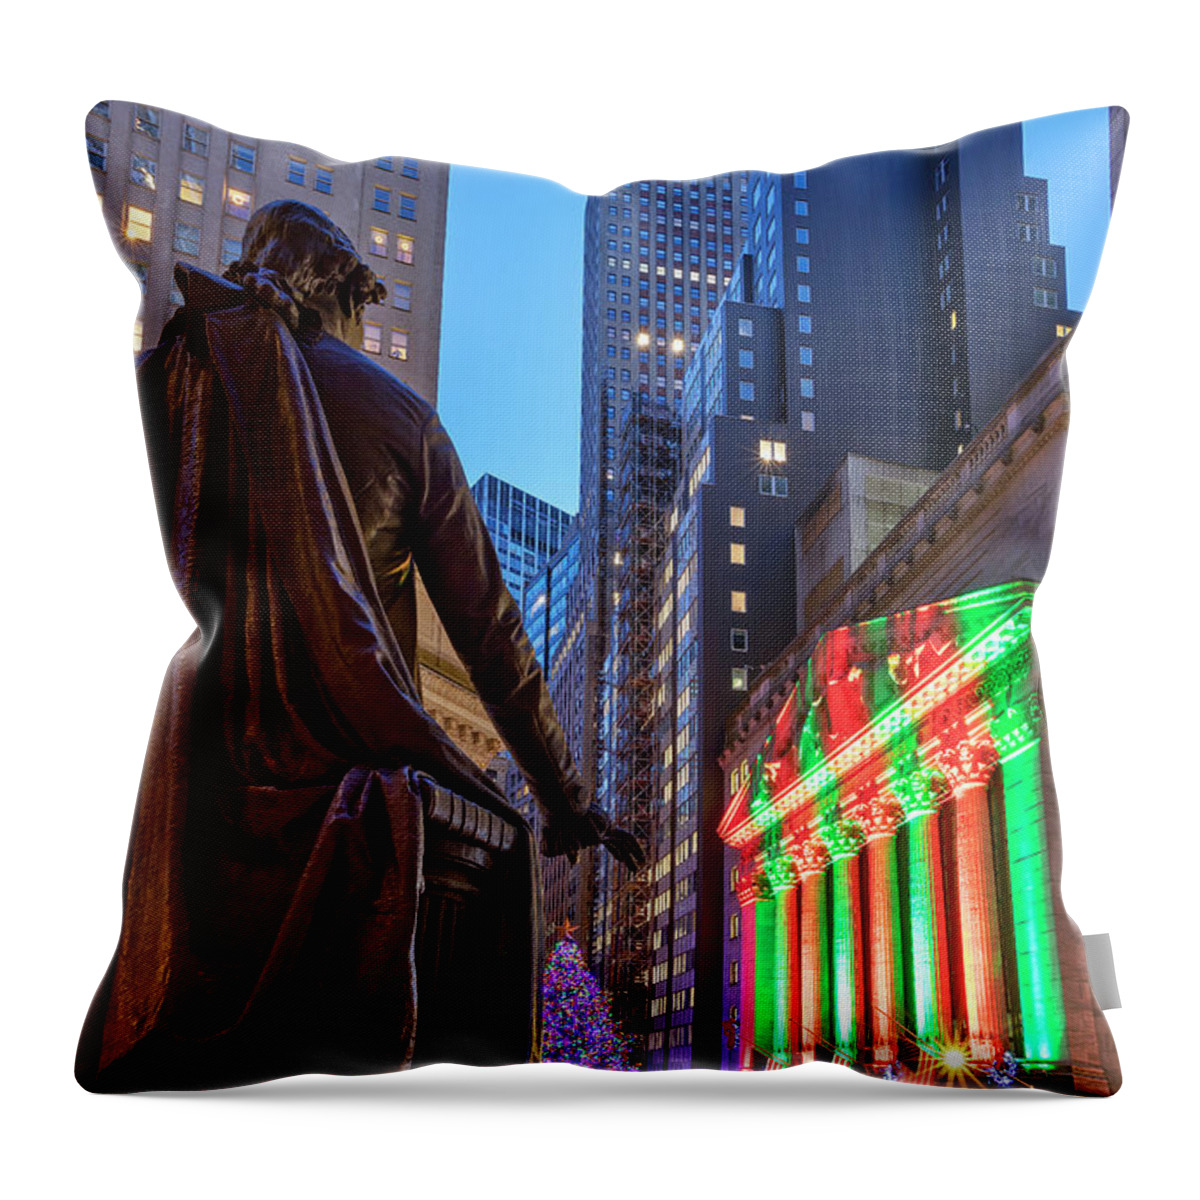 Estock Throw Pillow featuring the digital art Stock Exchange, Wall Street Nyc #1 by Lumiere